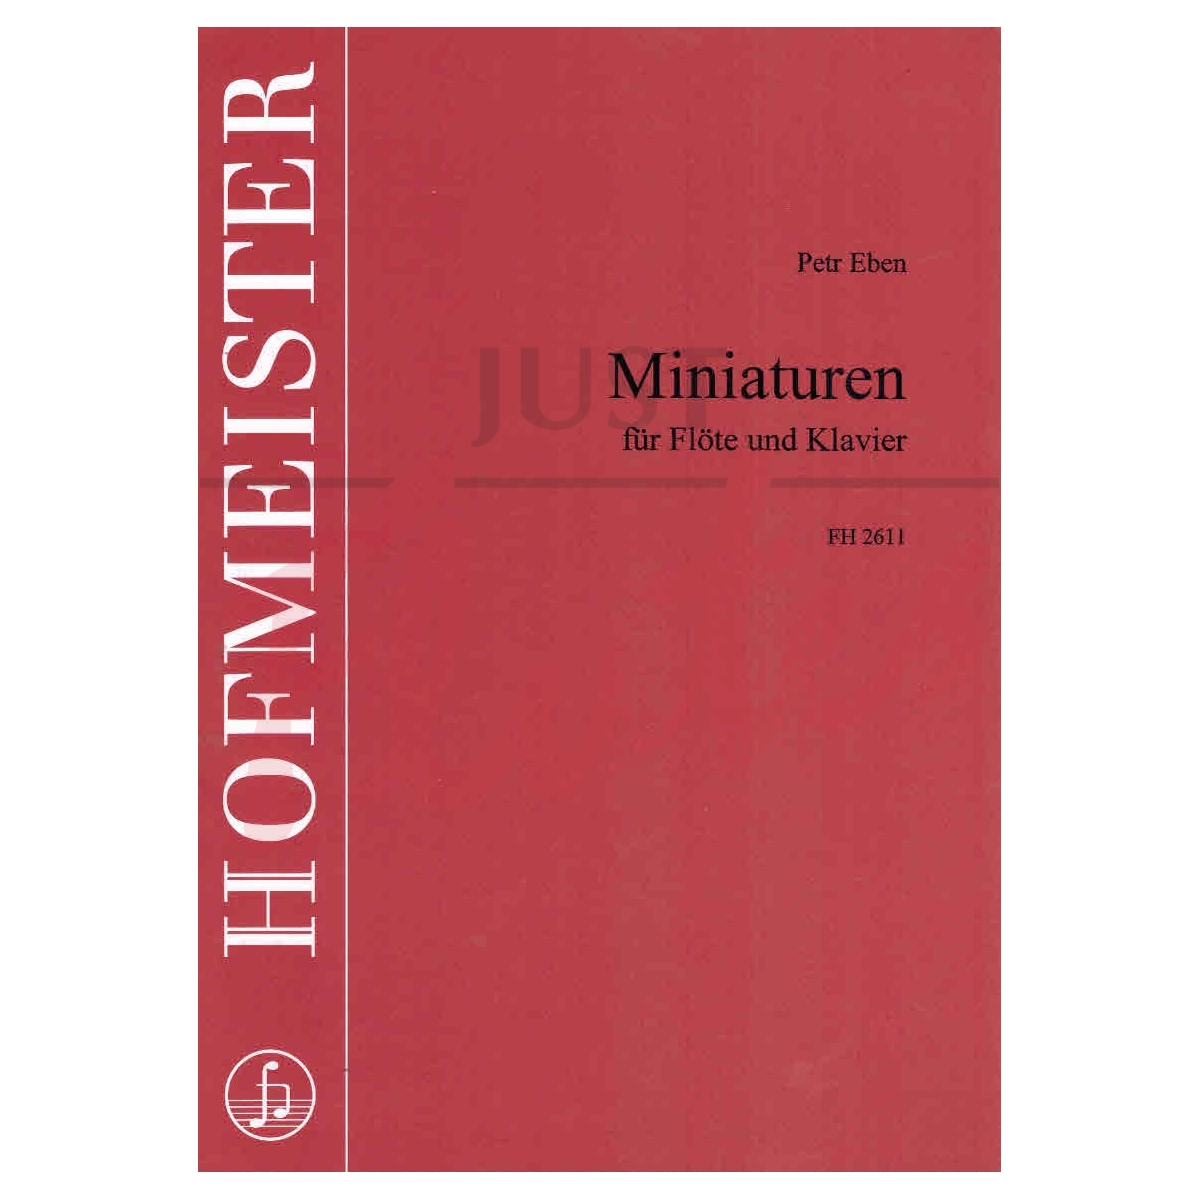 Miniatures for Flute and Piano